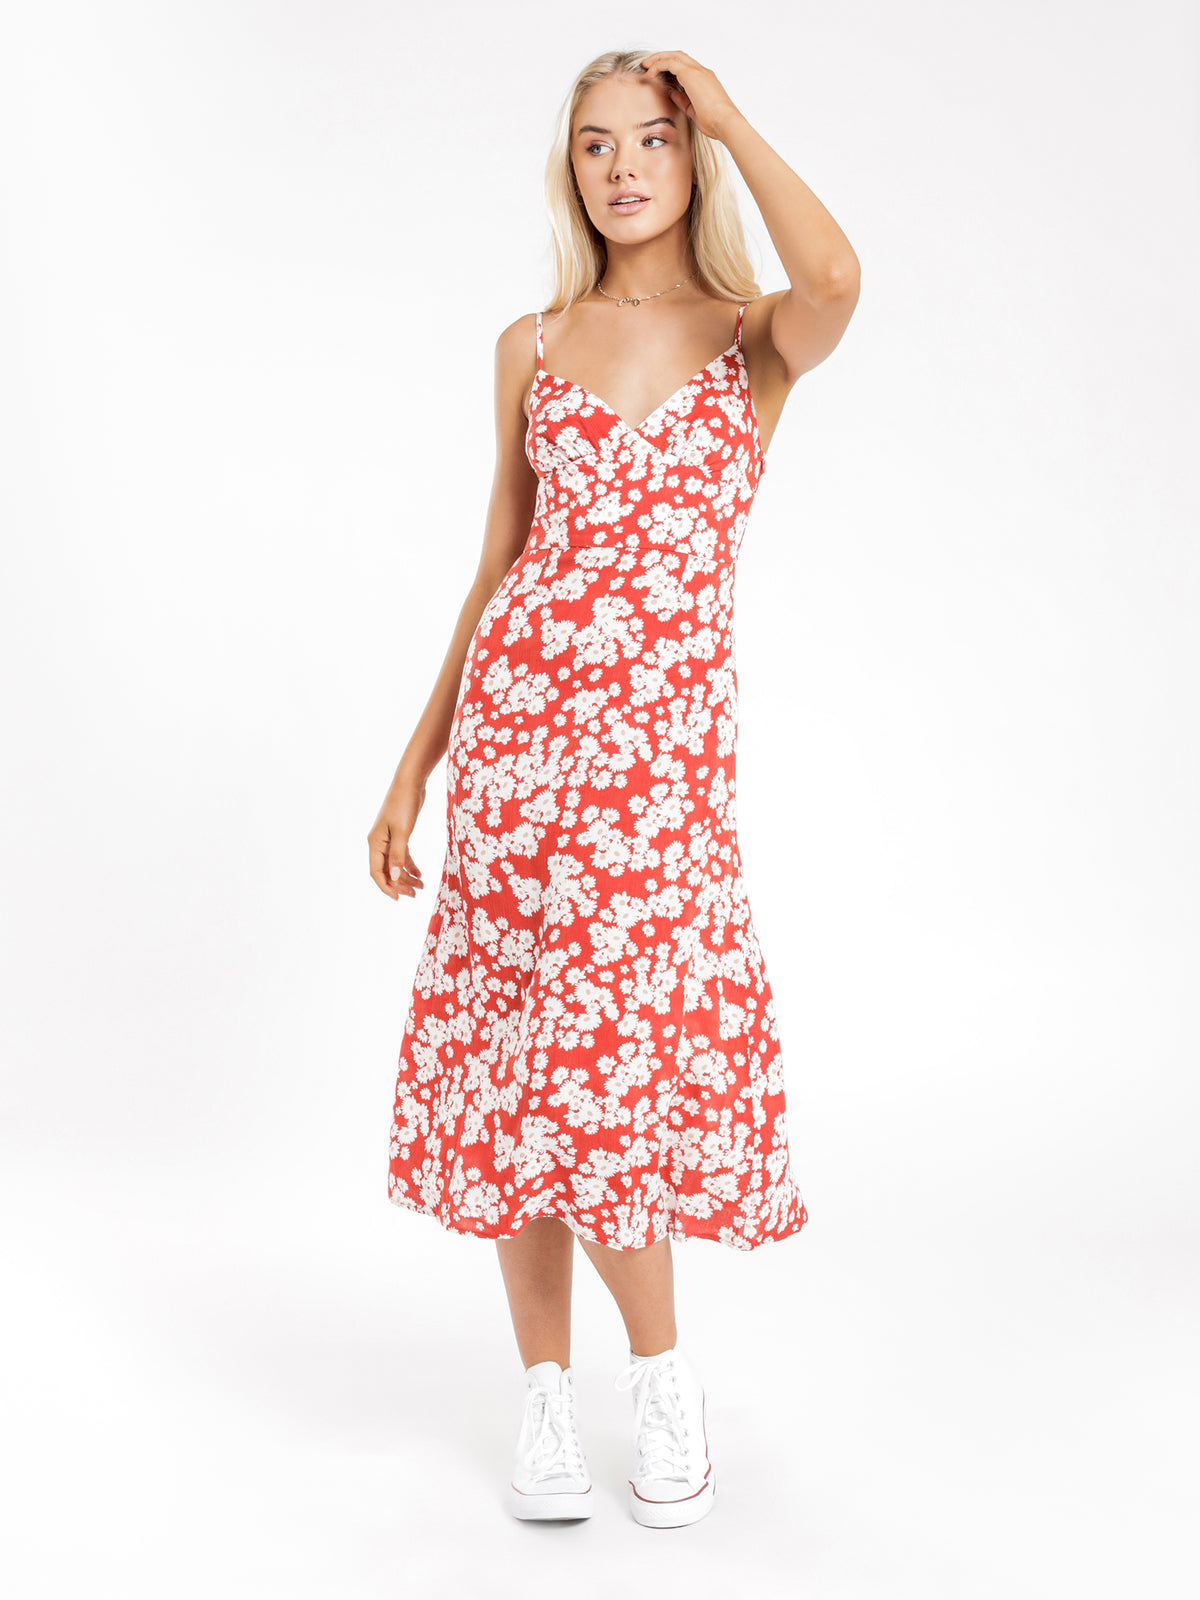 Paloma Midi Dress in Red Floral